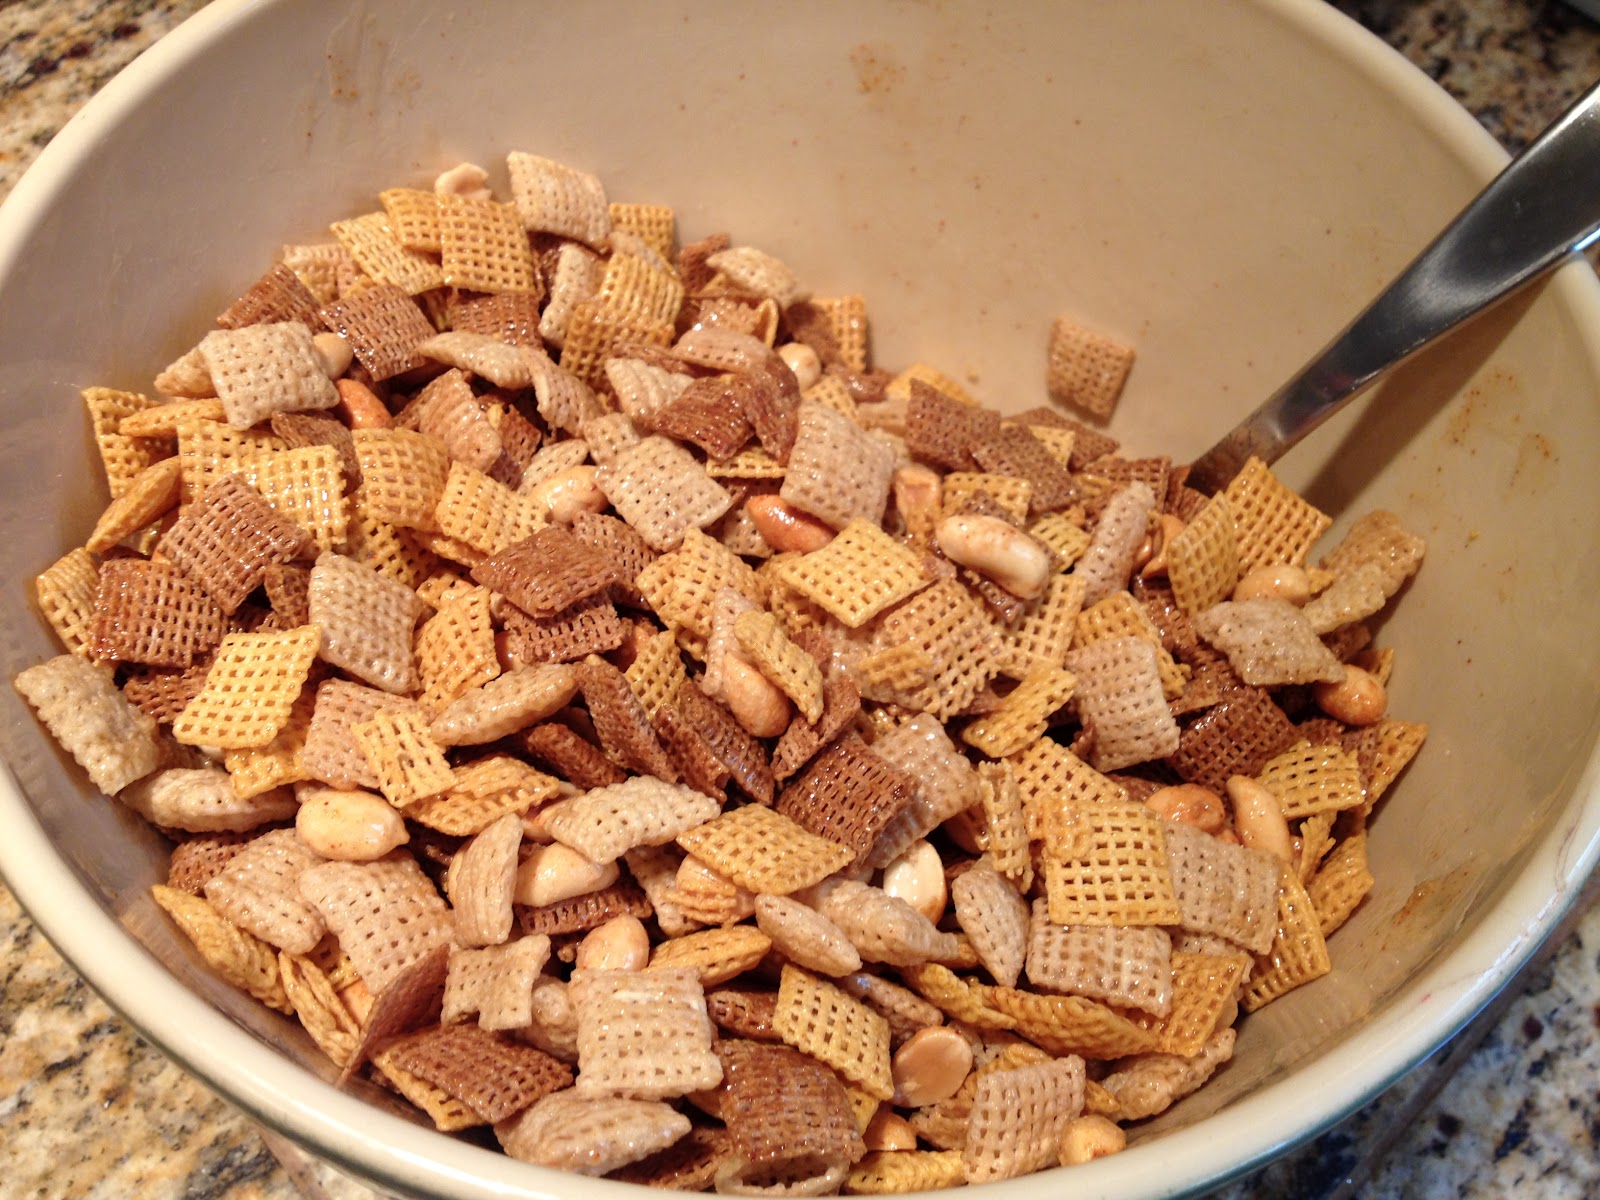 marvelous things: maple bacon chex mix